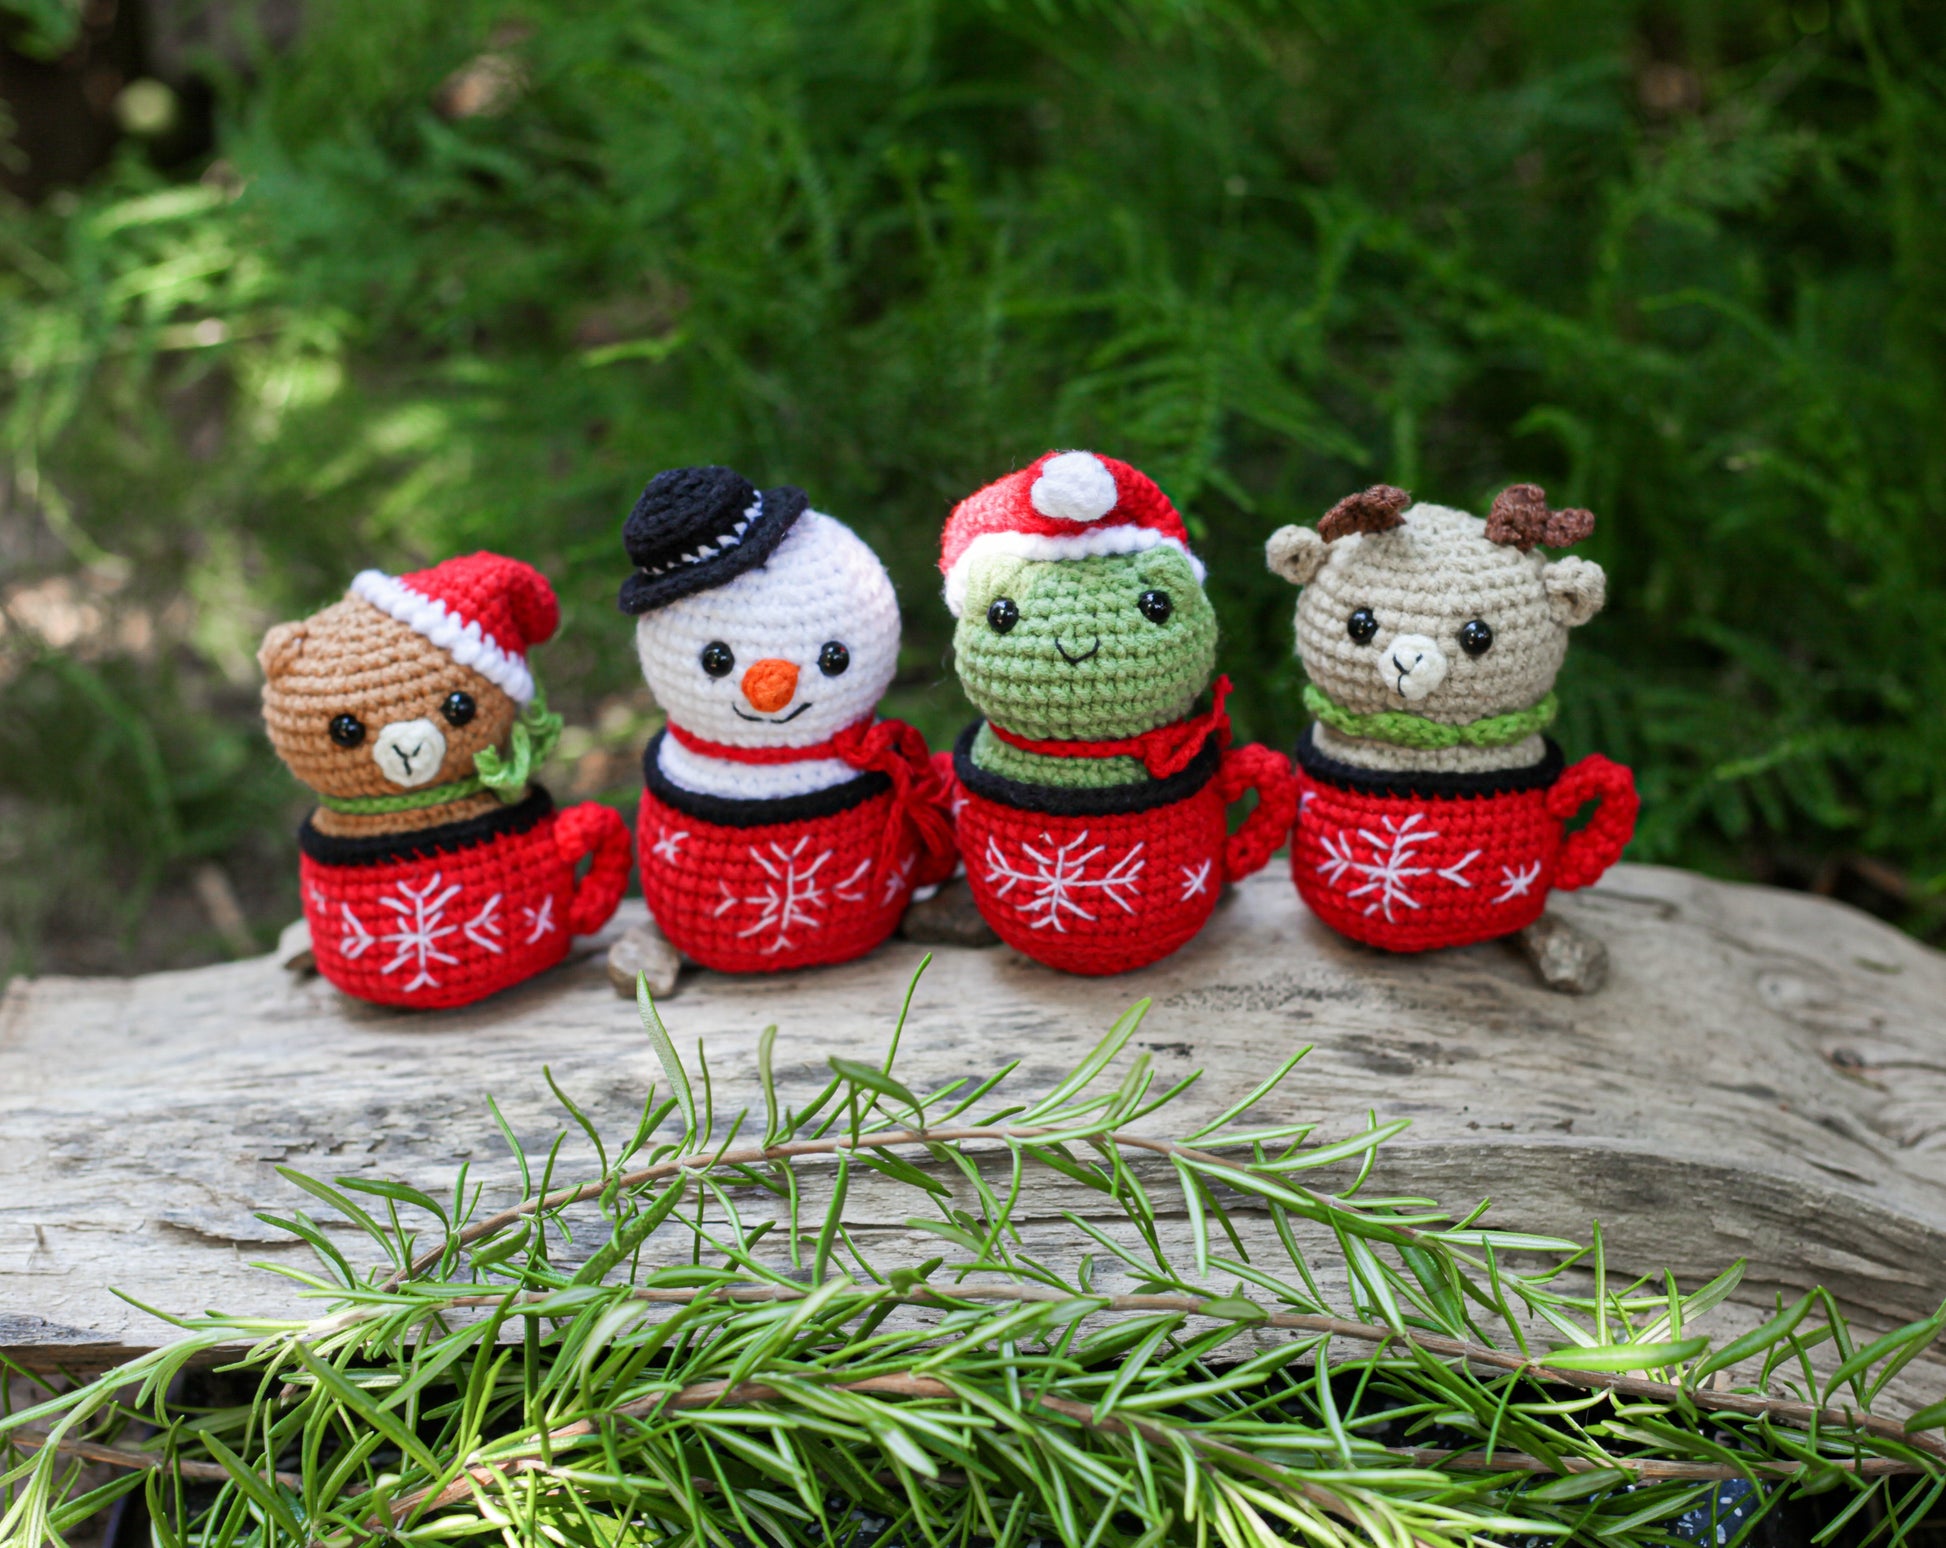 Christmas-themed set of 4 crochet mini doll amigurumis, artistically displayed, highlighting their multifunctional use as desk accessories, car companions, customizable keychains, and charming holiday ornaments.